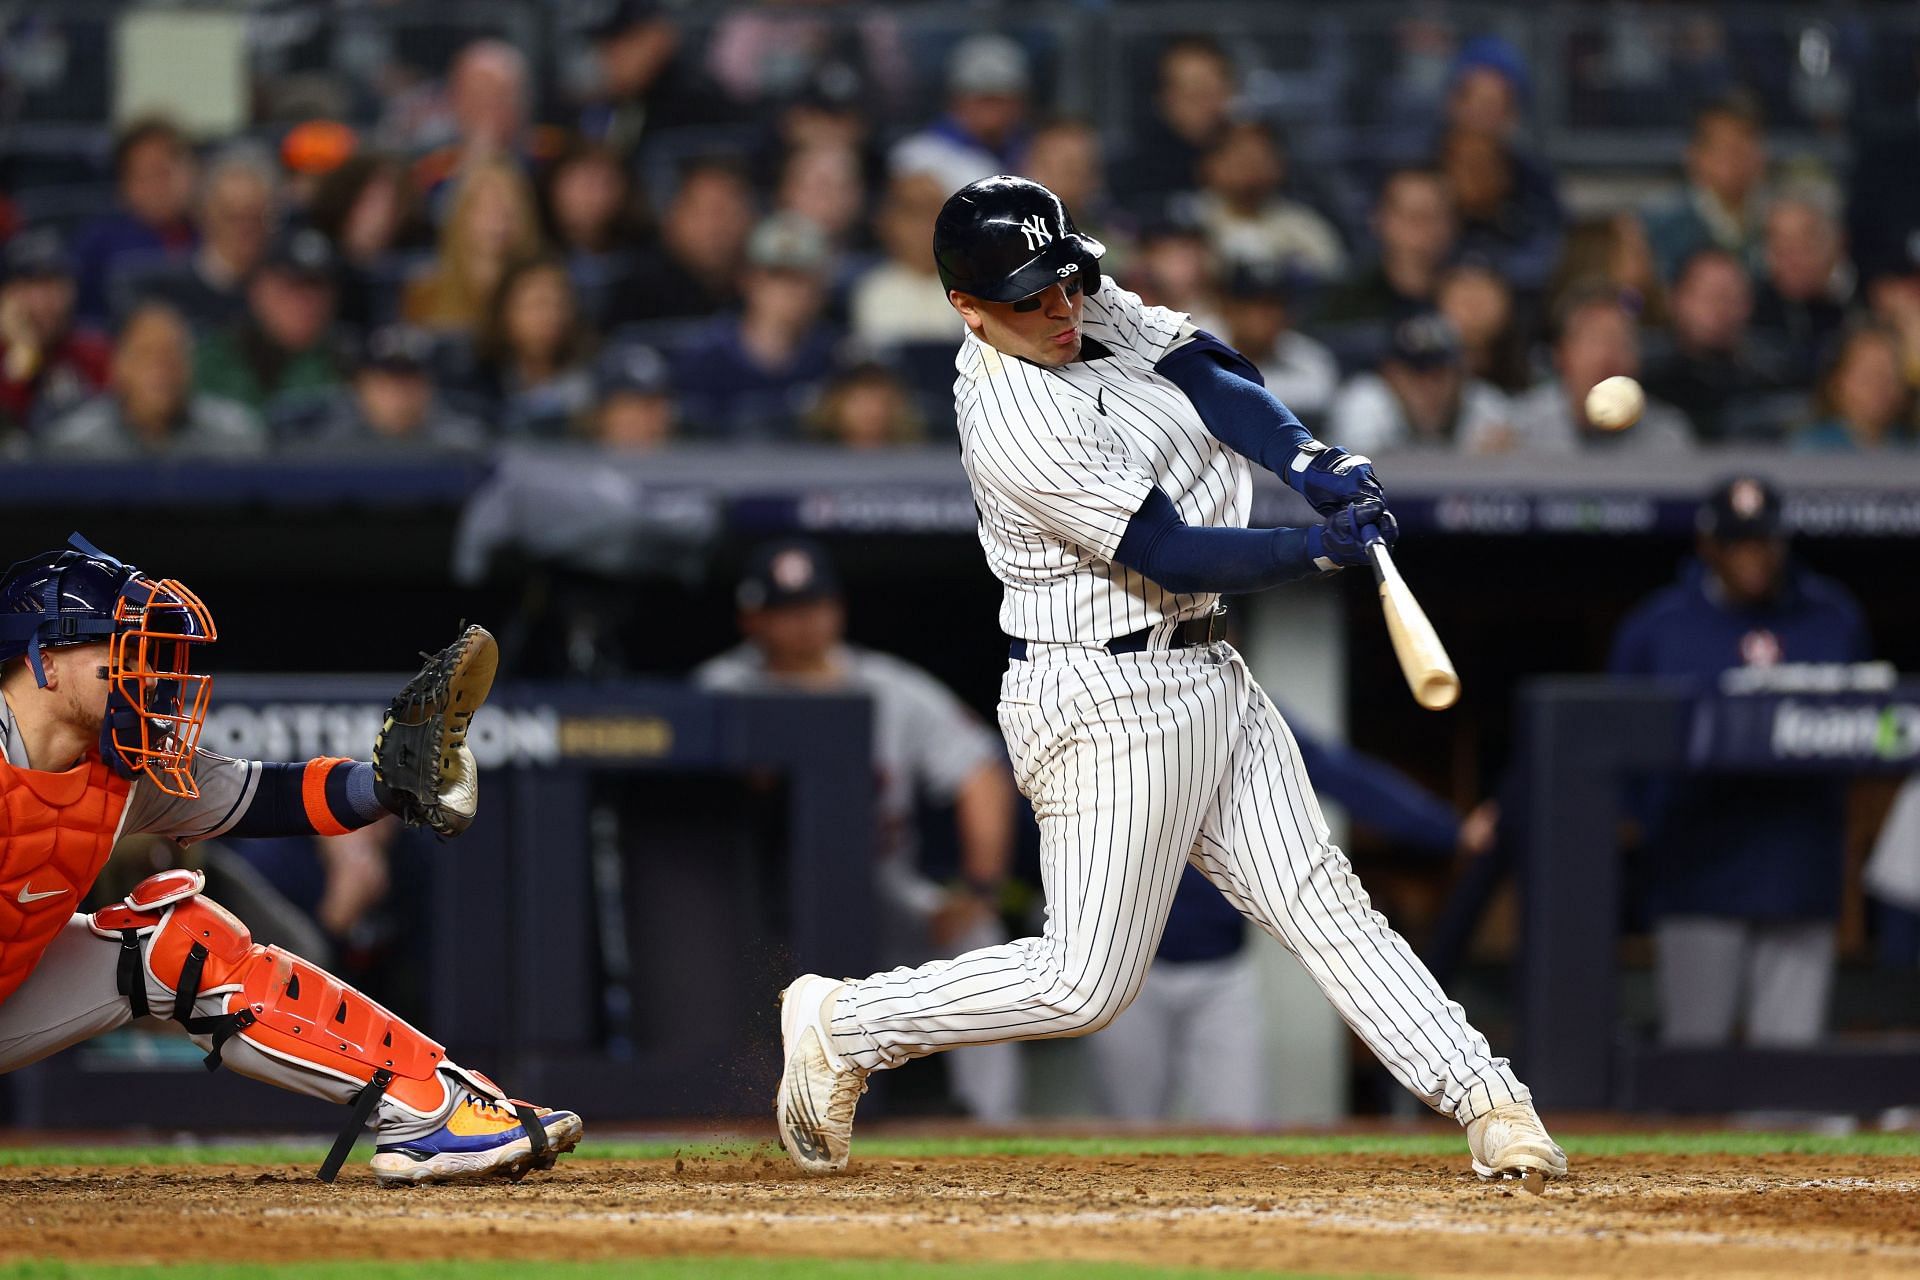 Jose Trevino providing unexpected pop at the plate for Yankees